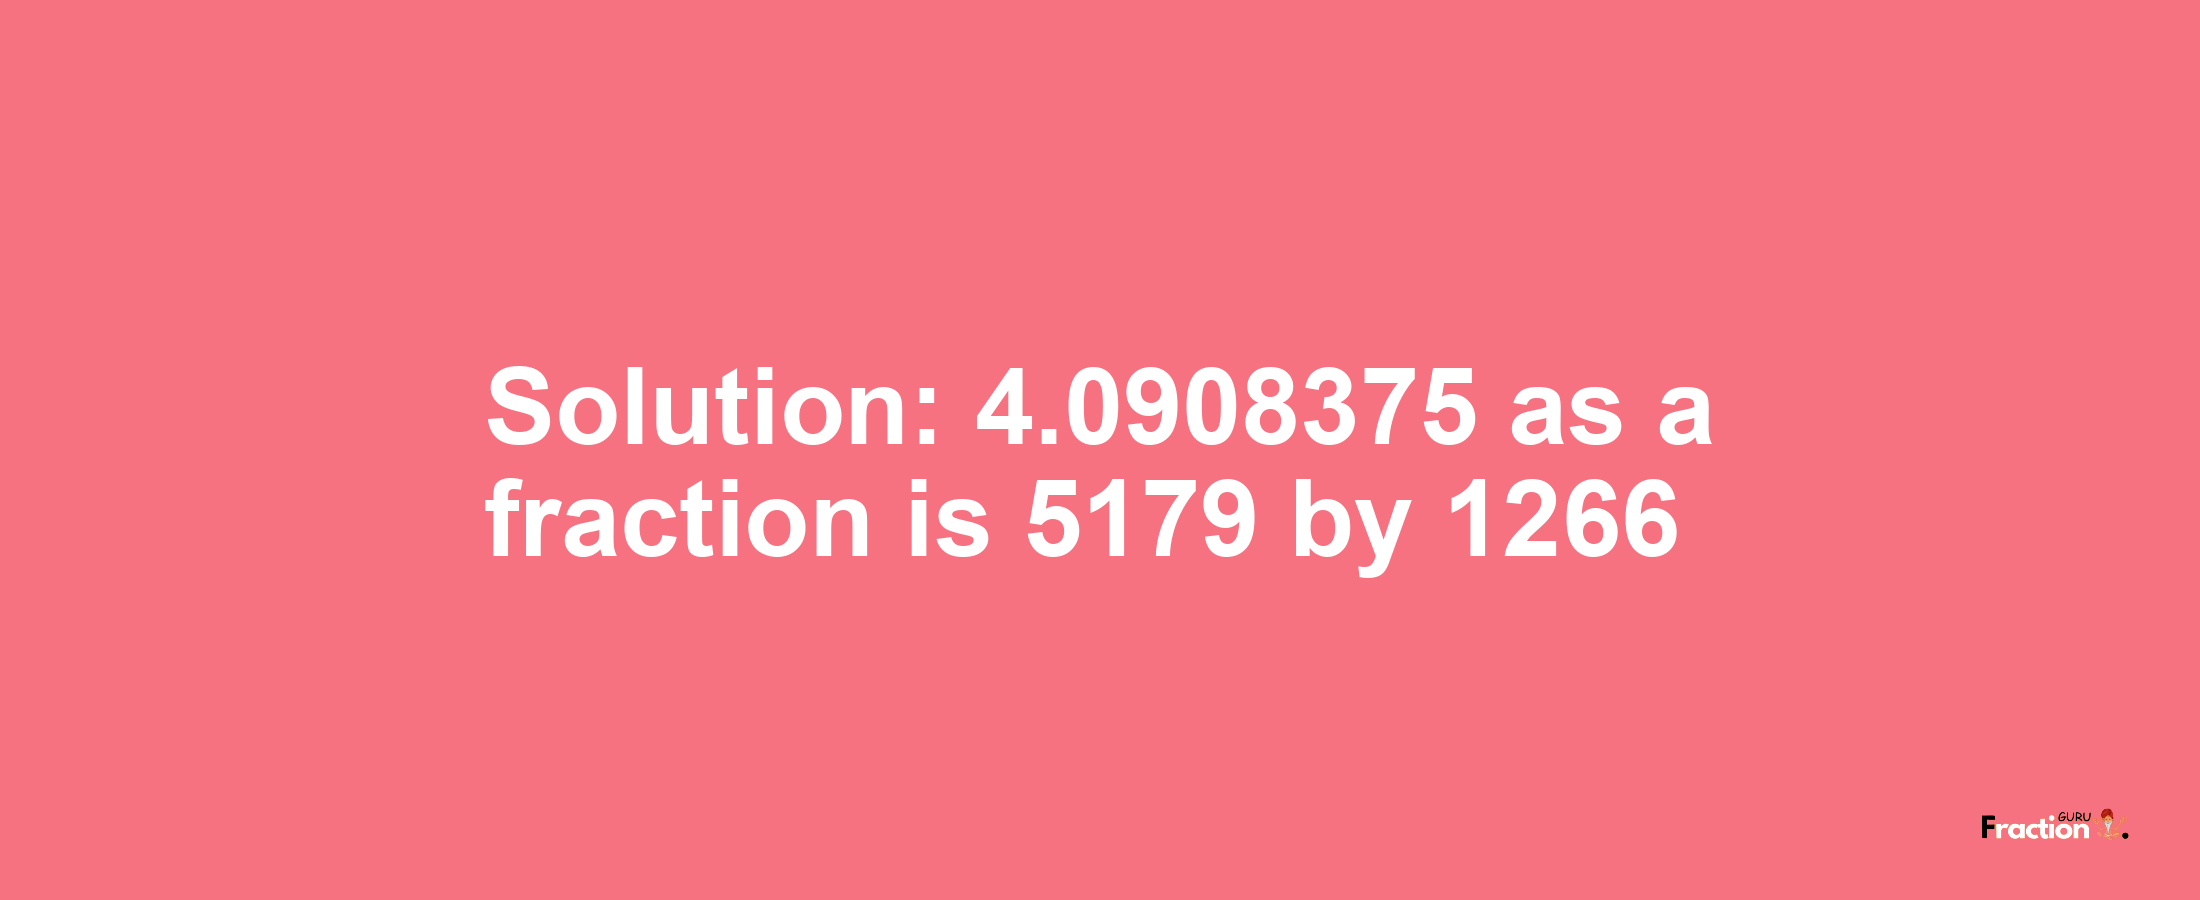 Solution:4.0908375 as a fraction is 5179/1266